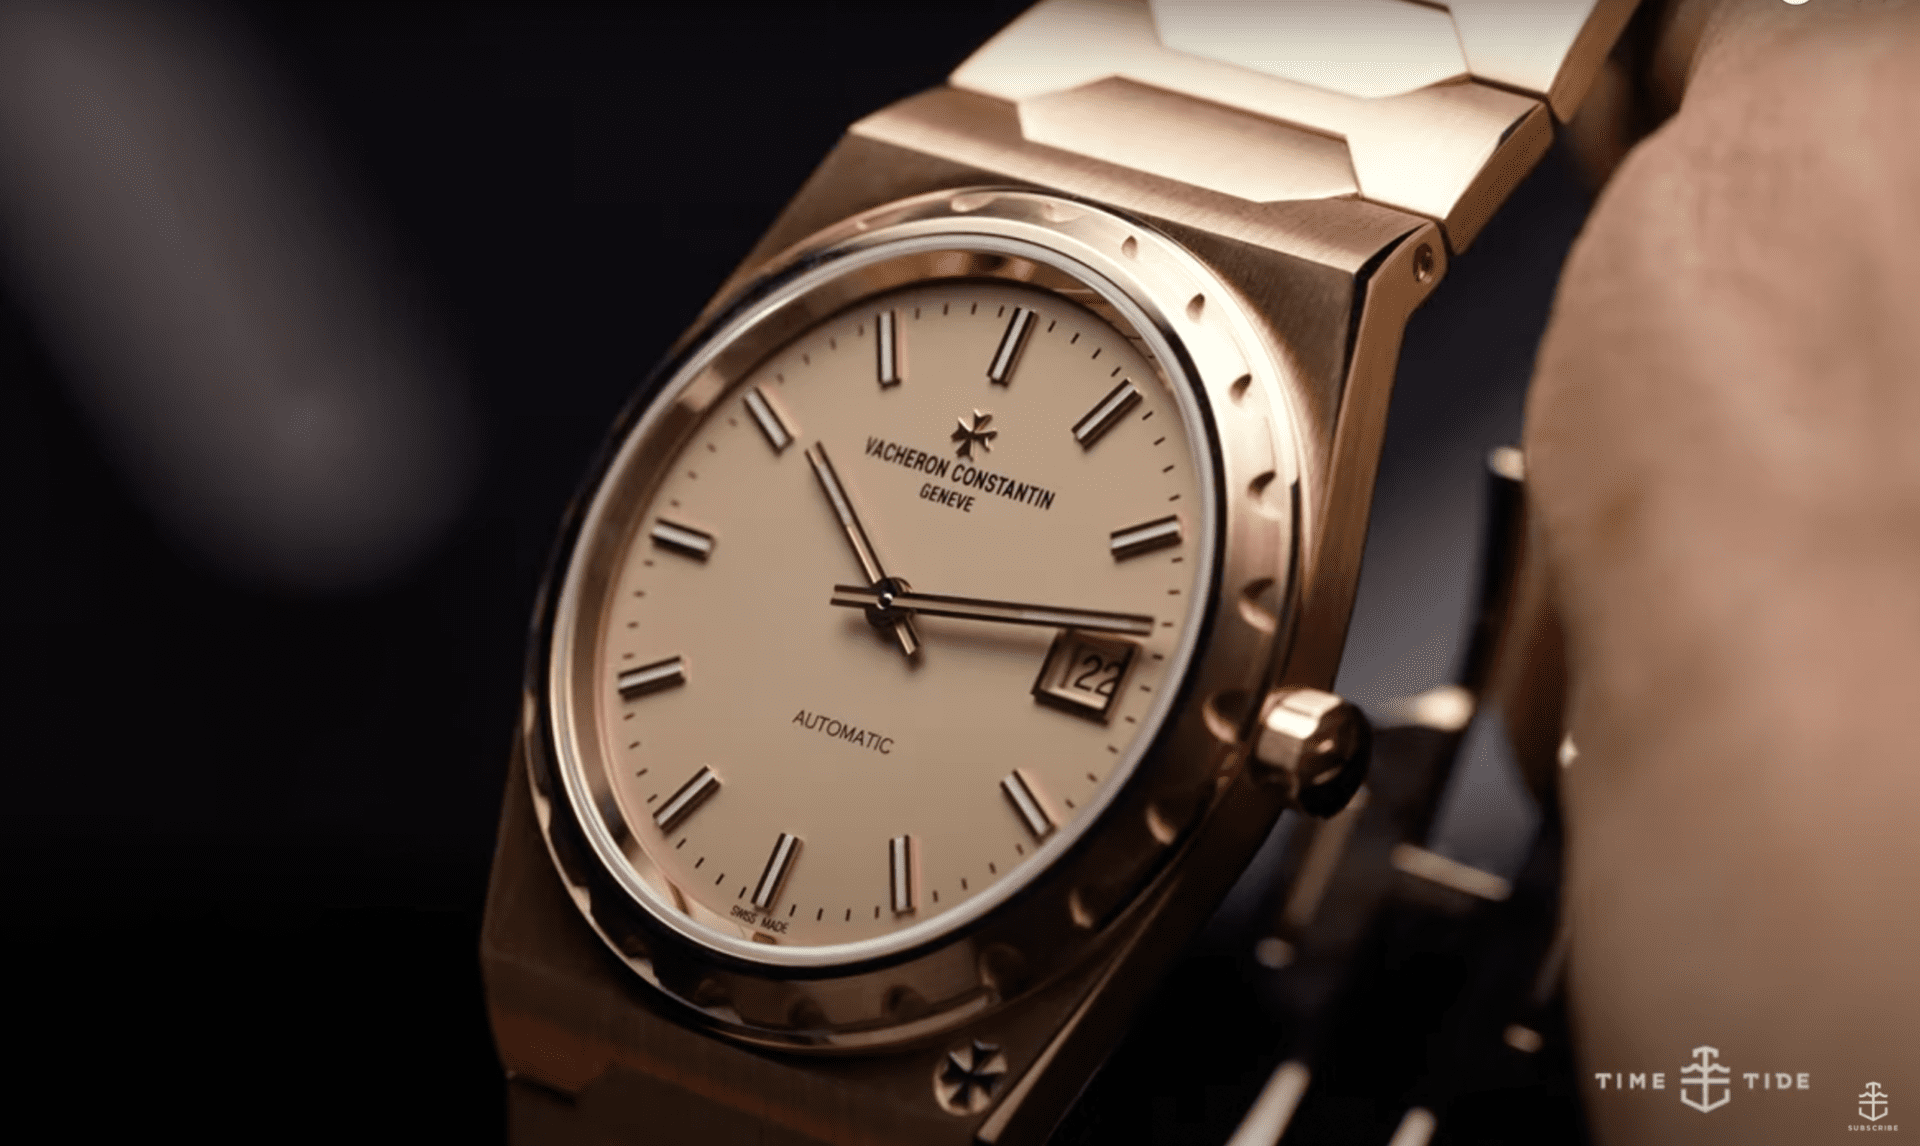 VIDEO: The return of the 222 – our first take on Vacheron Constantin’s new releases